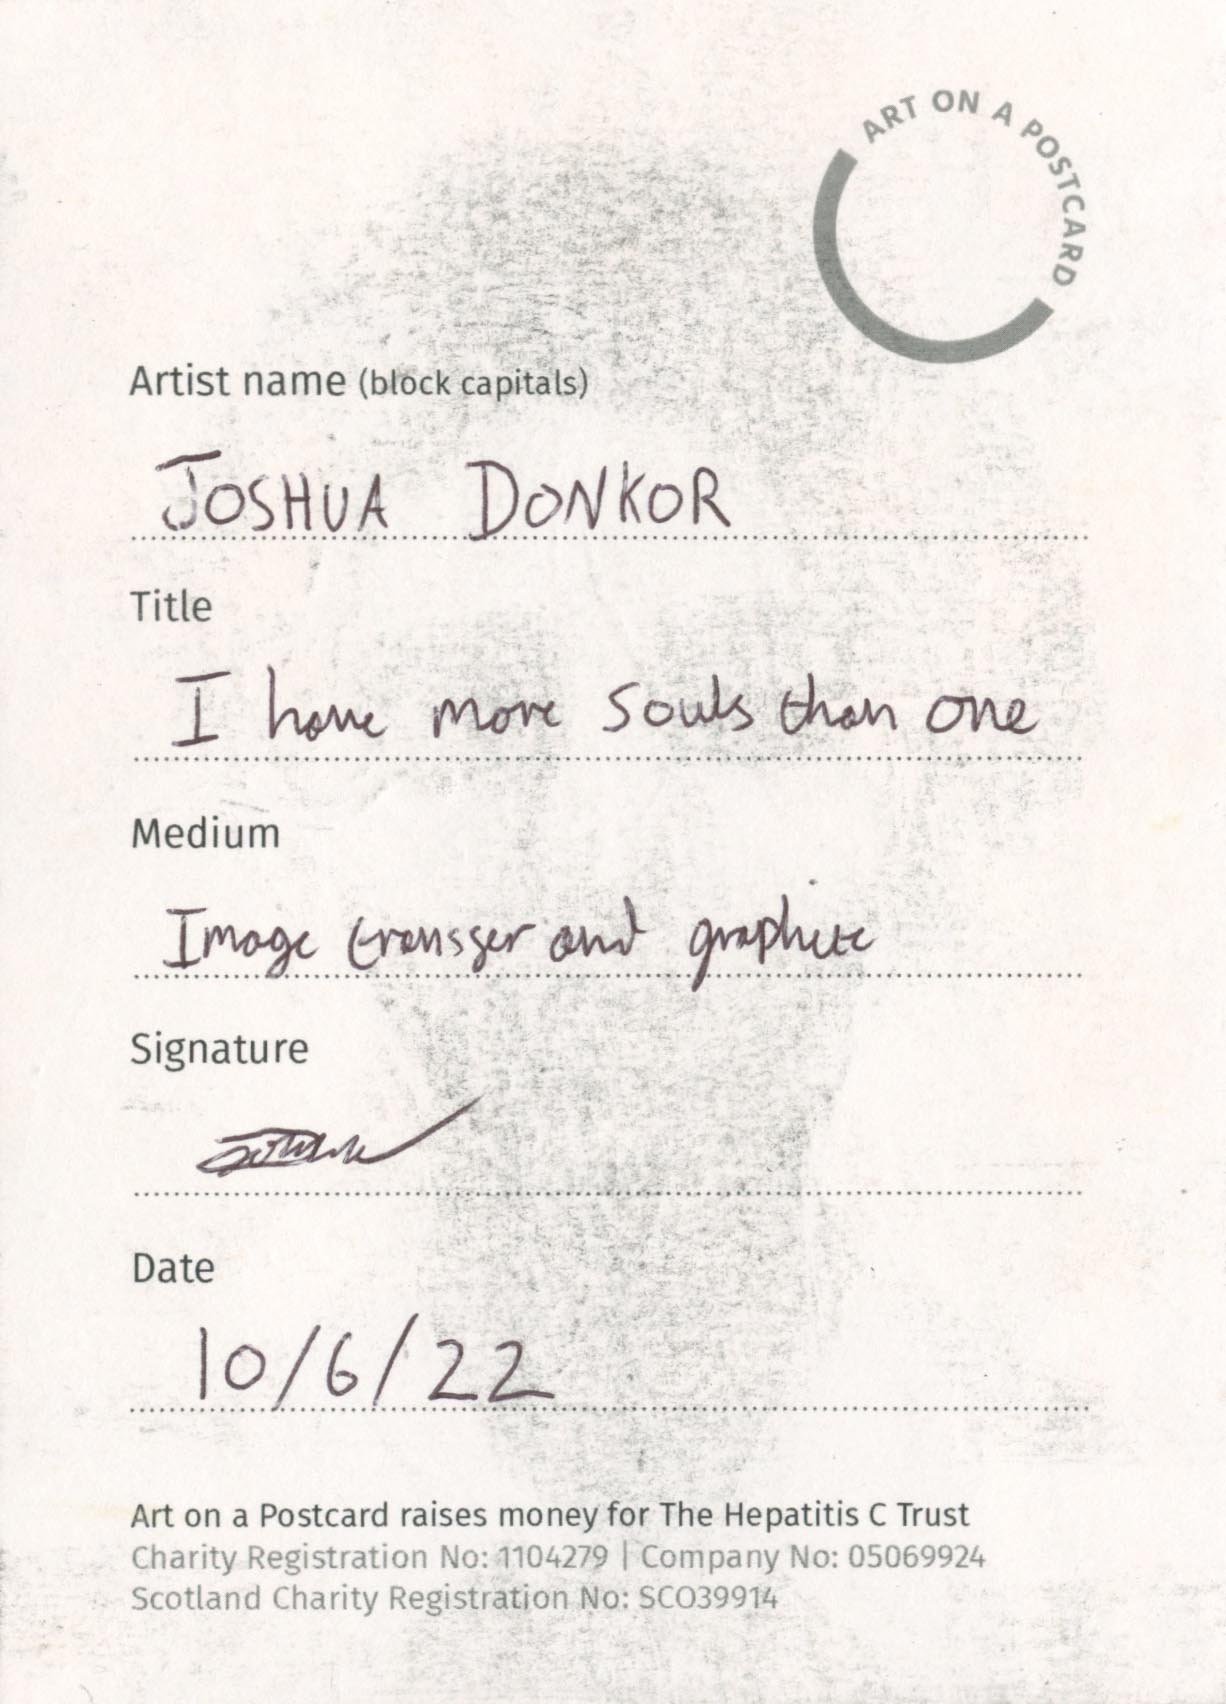 4. Joshua Donkor - I Have More Souls Than One - BACK